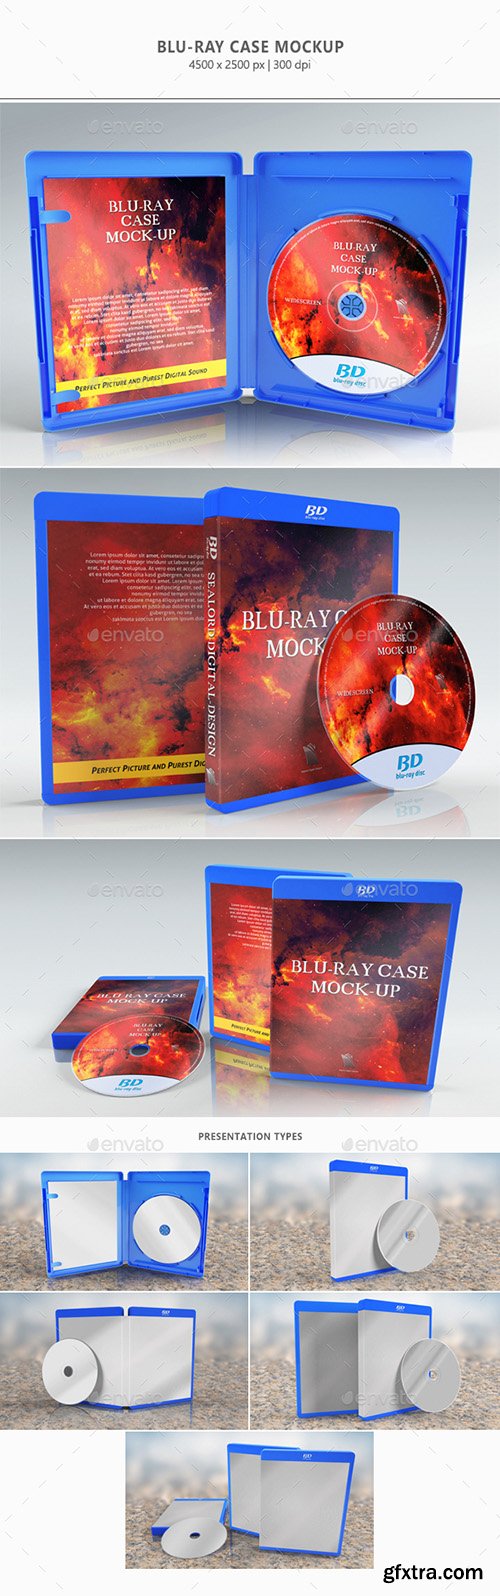 Graphicriver Blu-ray Case Mock-up 7901622